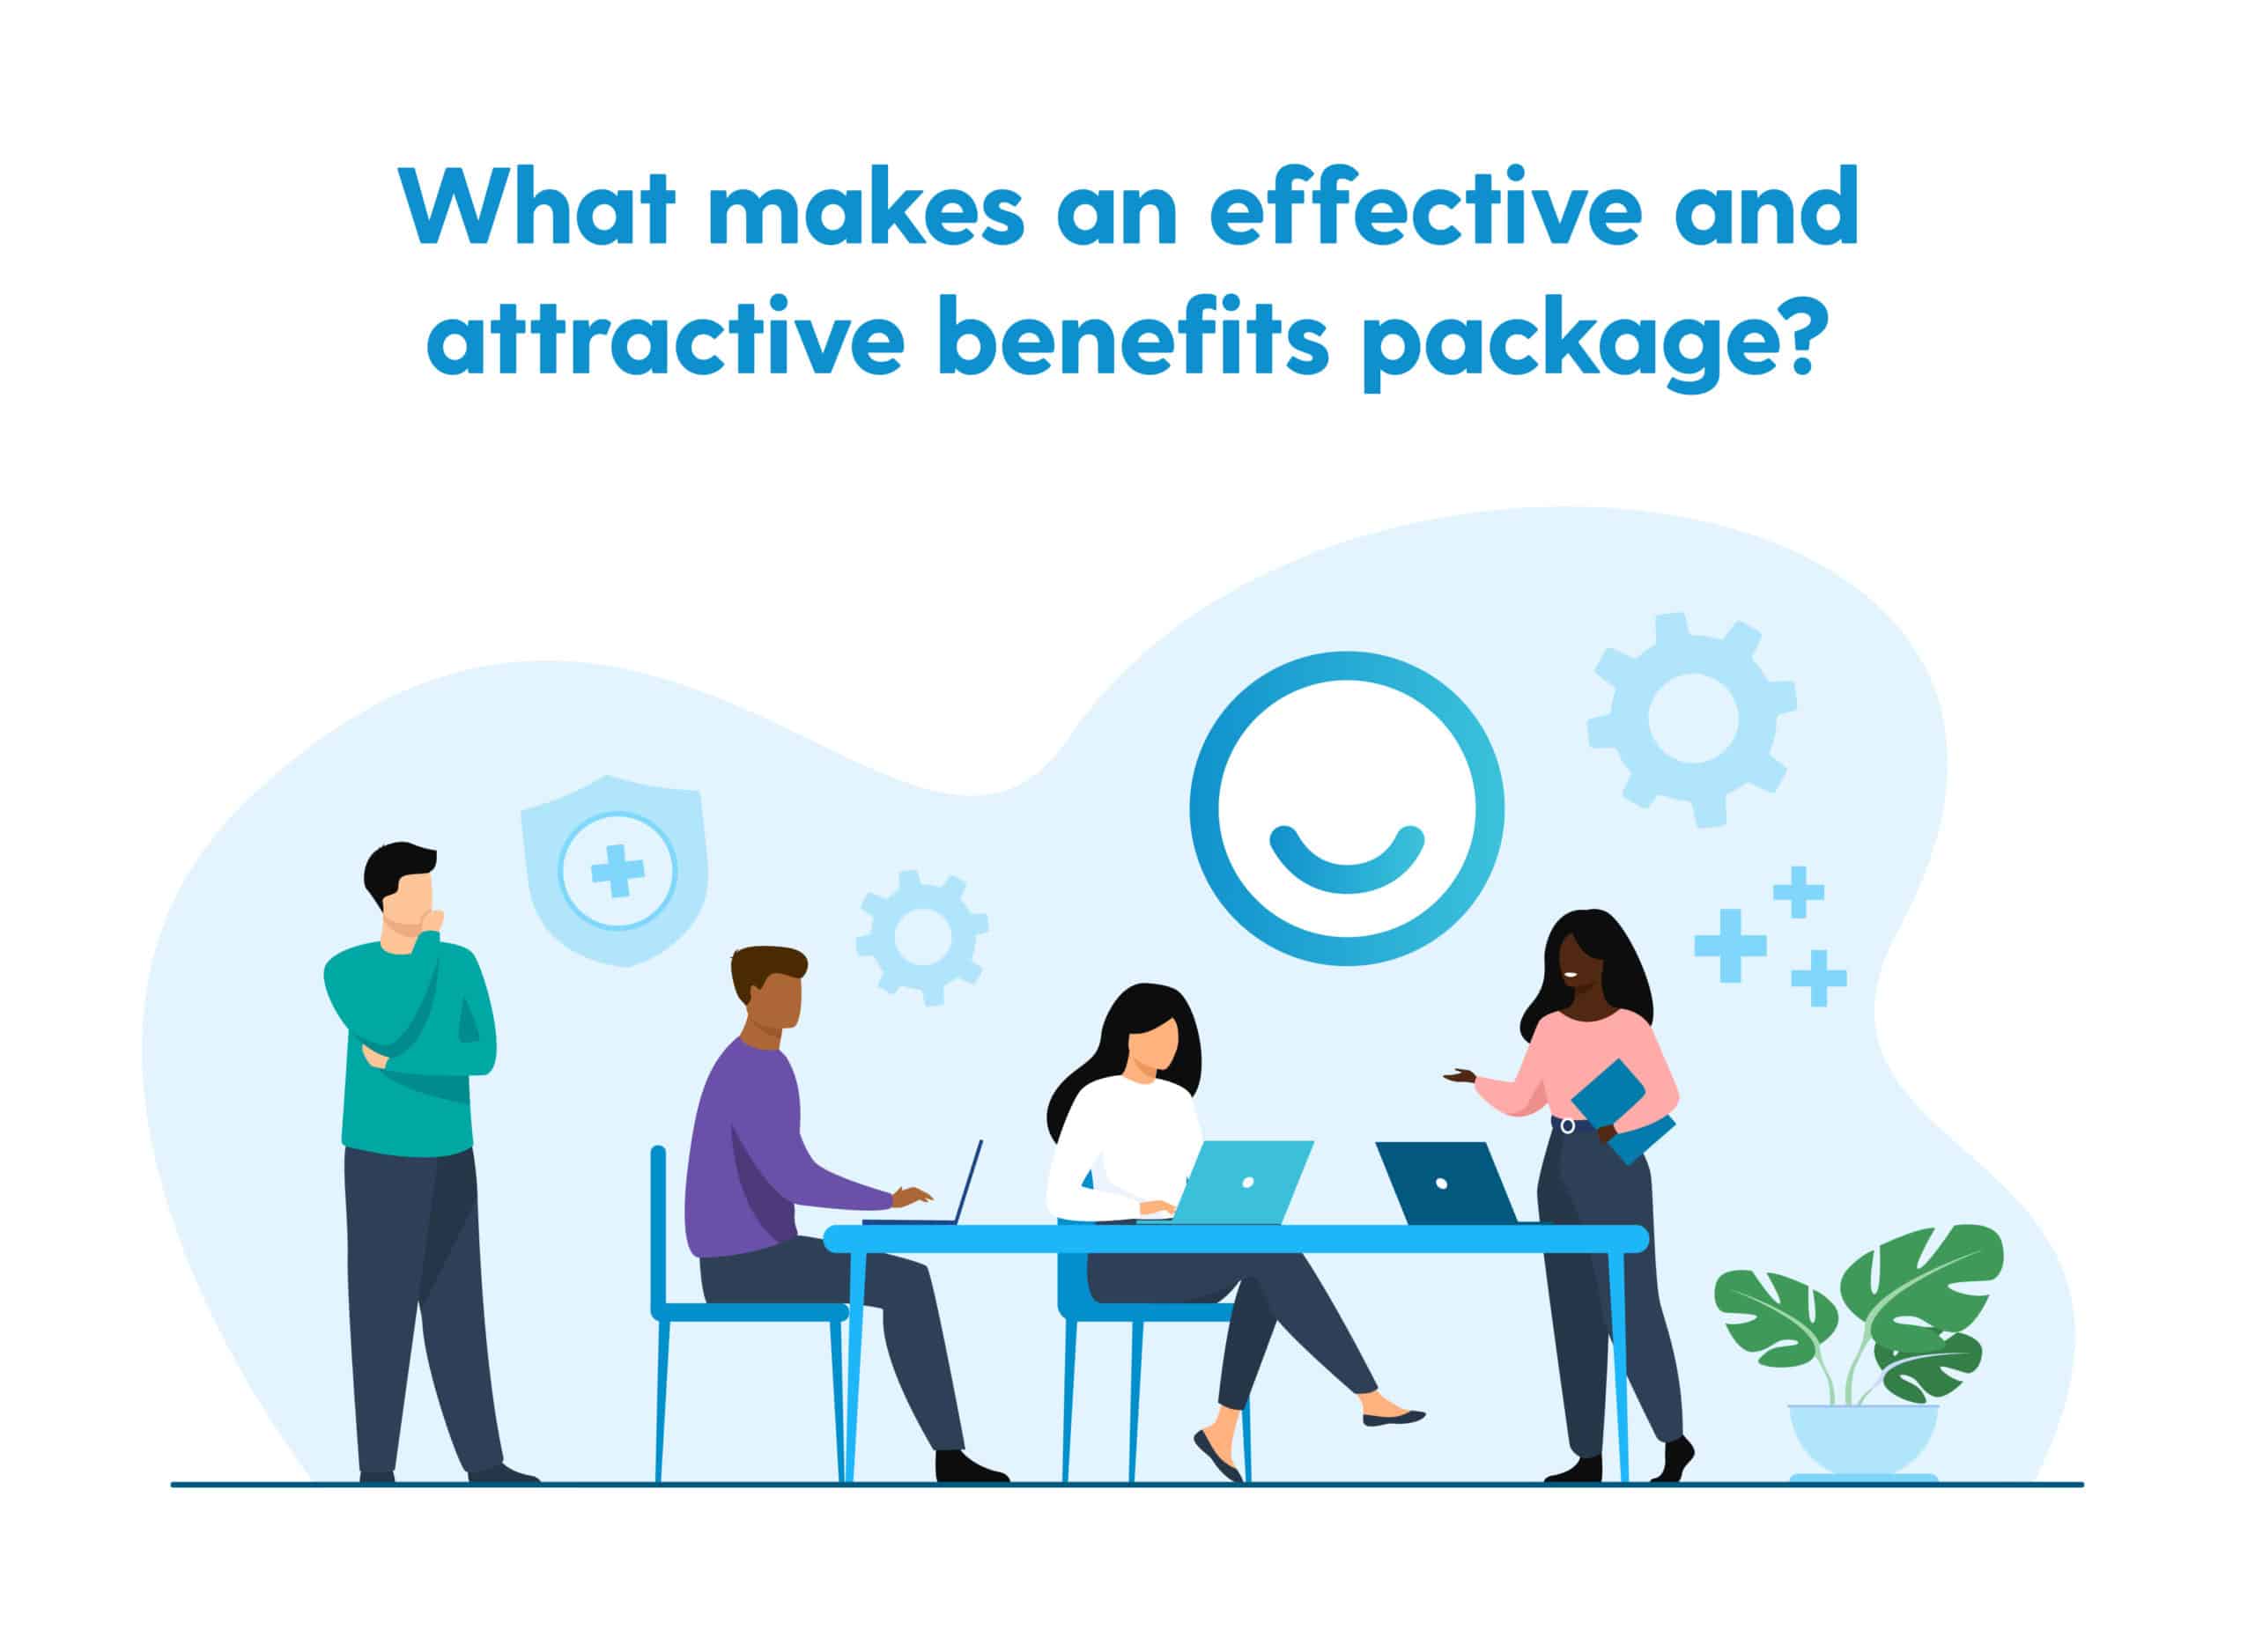 The Ultimate Guide to Employee Benefits in Singapore